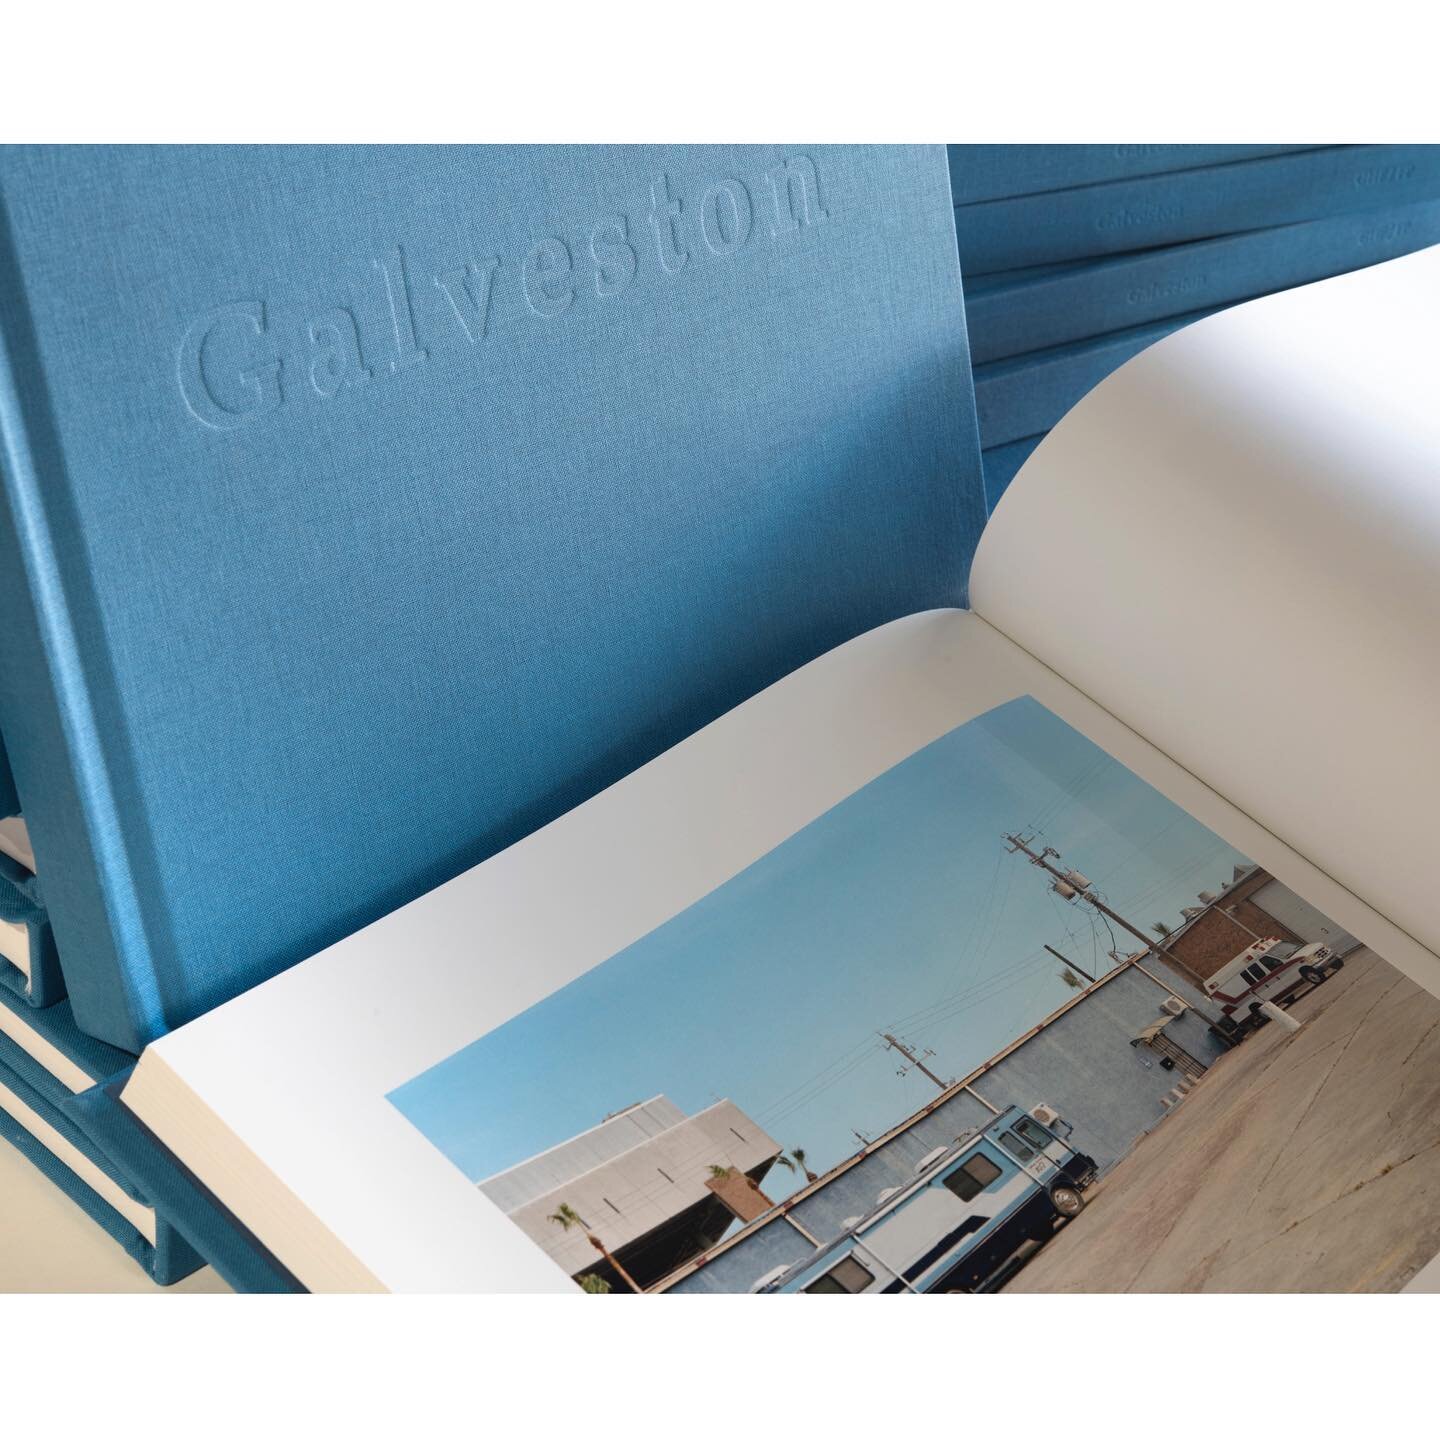 While our allotted copies of @jasonlee&rsquo;s new book Galveston are now sold out,
a limited number of copies are available through co-publisher Galveston Historical Foundation - DIRECT LINK IN OUR BIO.

Thank you to everyone who has purchased a cop